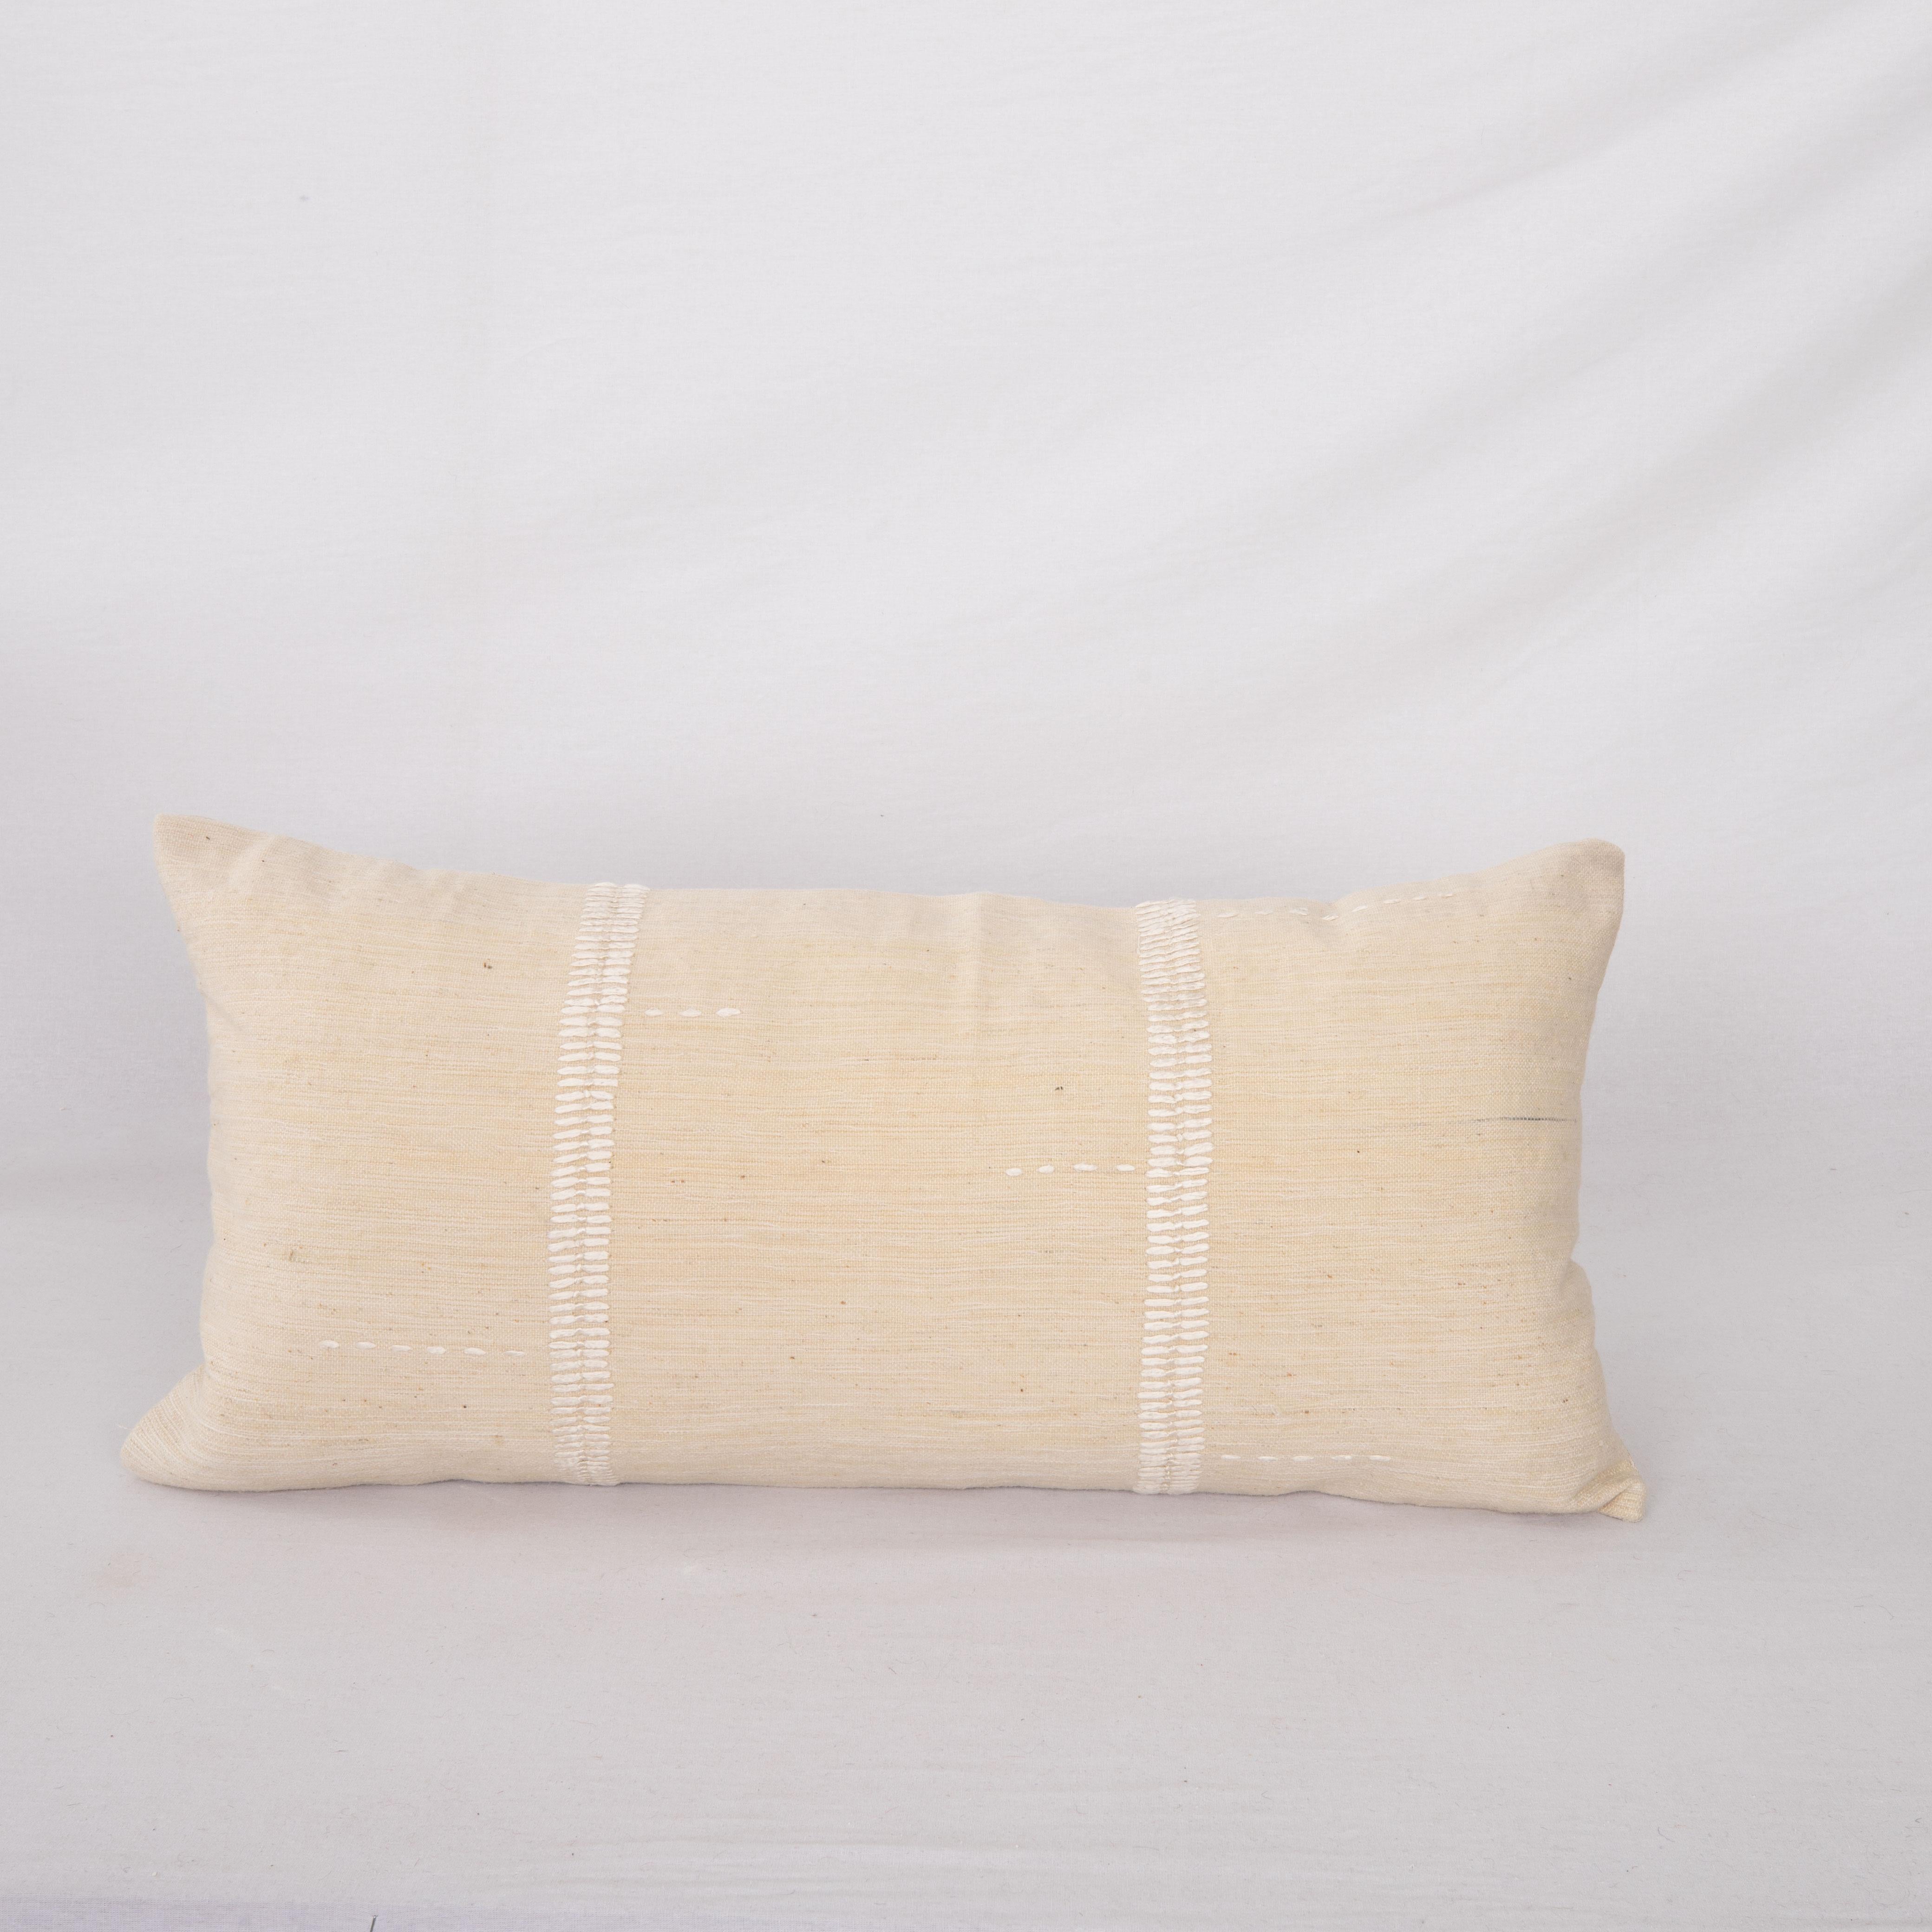 This pillow case is made from a vintage Anatolian Cotton Cover. Hand done silk stitching on it is our addition to the piece to give it a fine detail.

It does not come with inserts.
linen in the back.
Zipper closure.
Dry cleaning is reccommended
